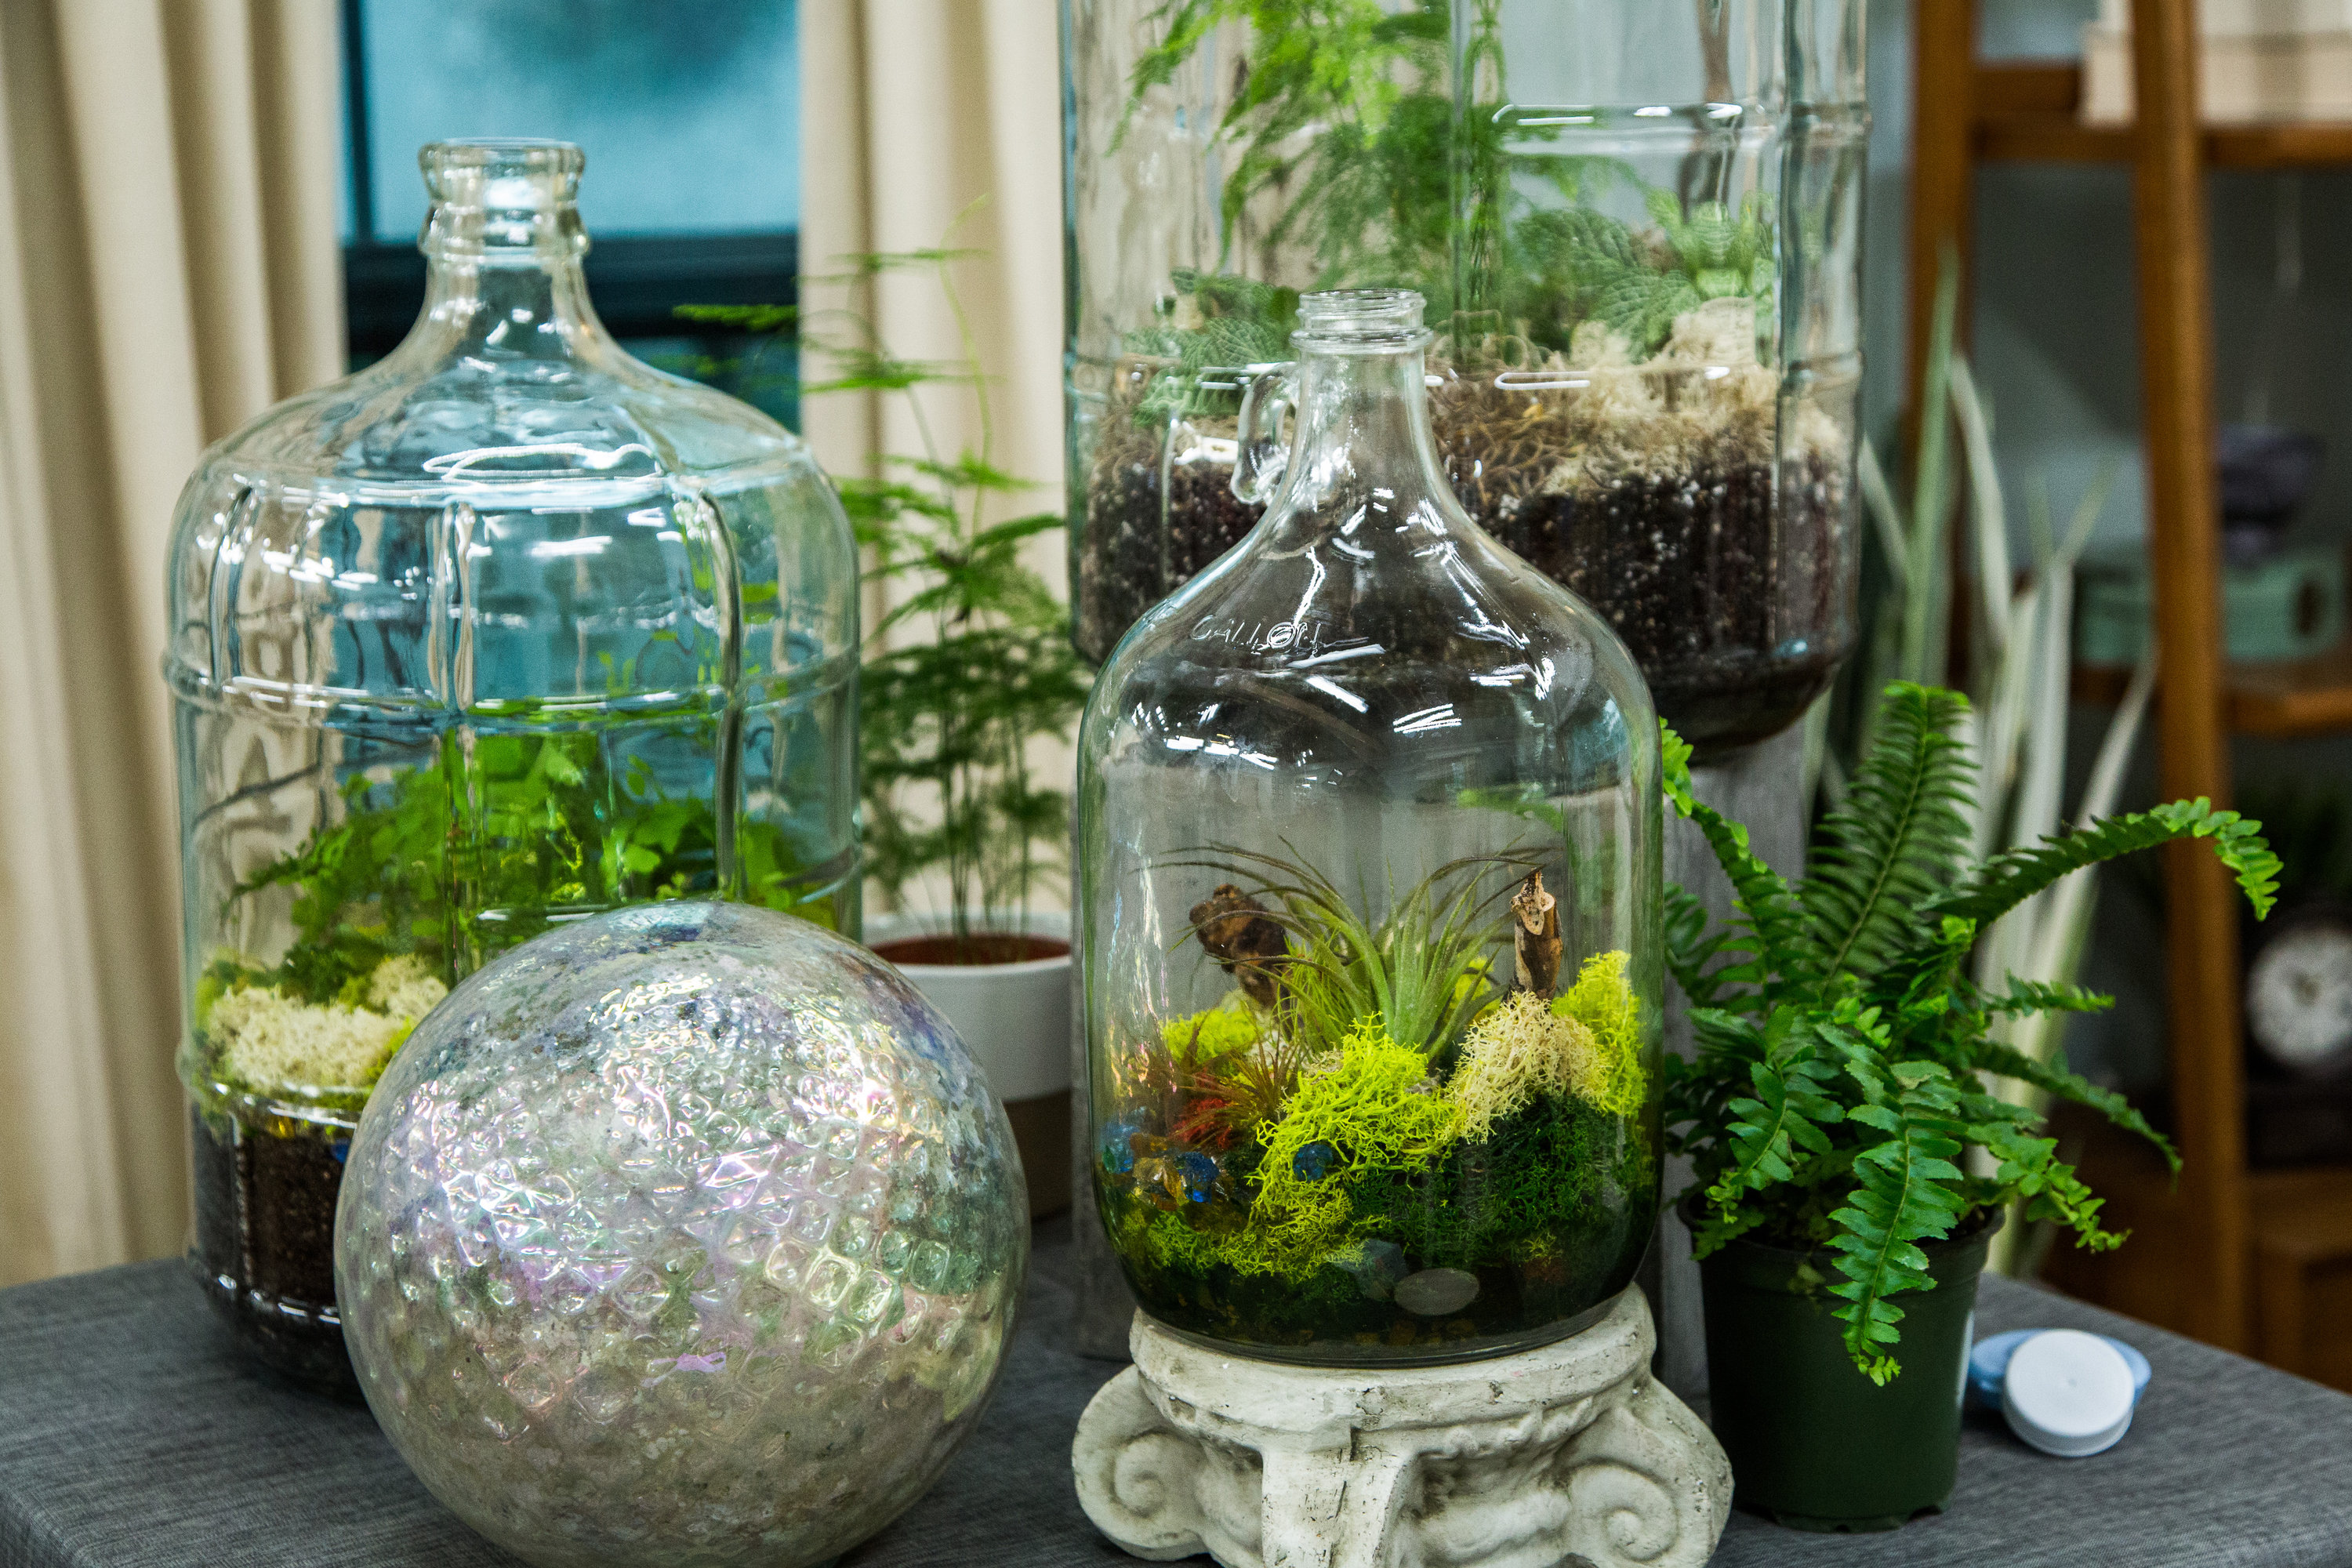 British grandfather created an ecosystem in a bottle